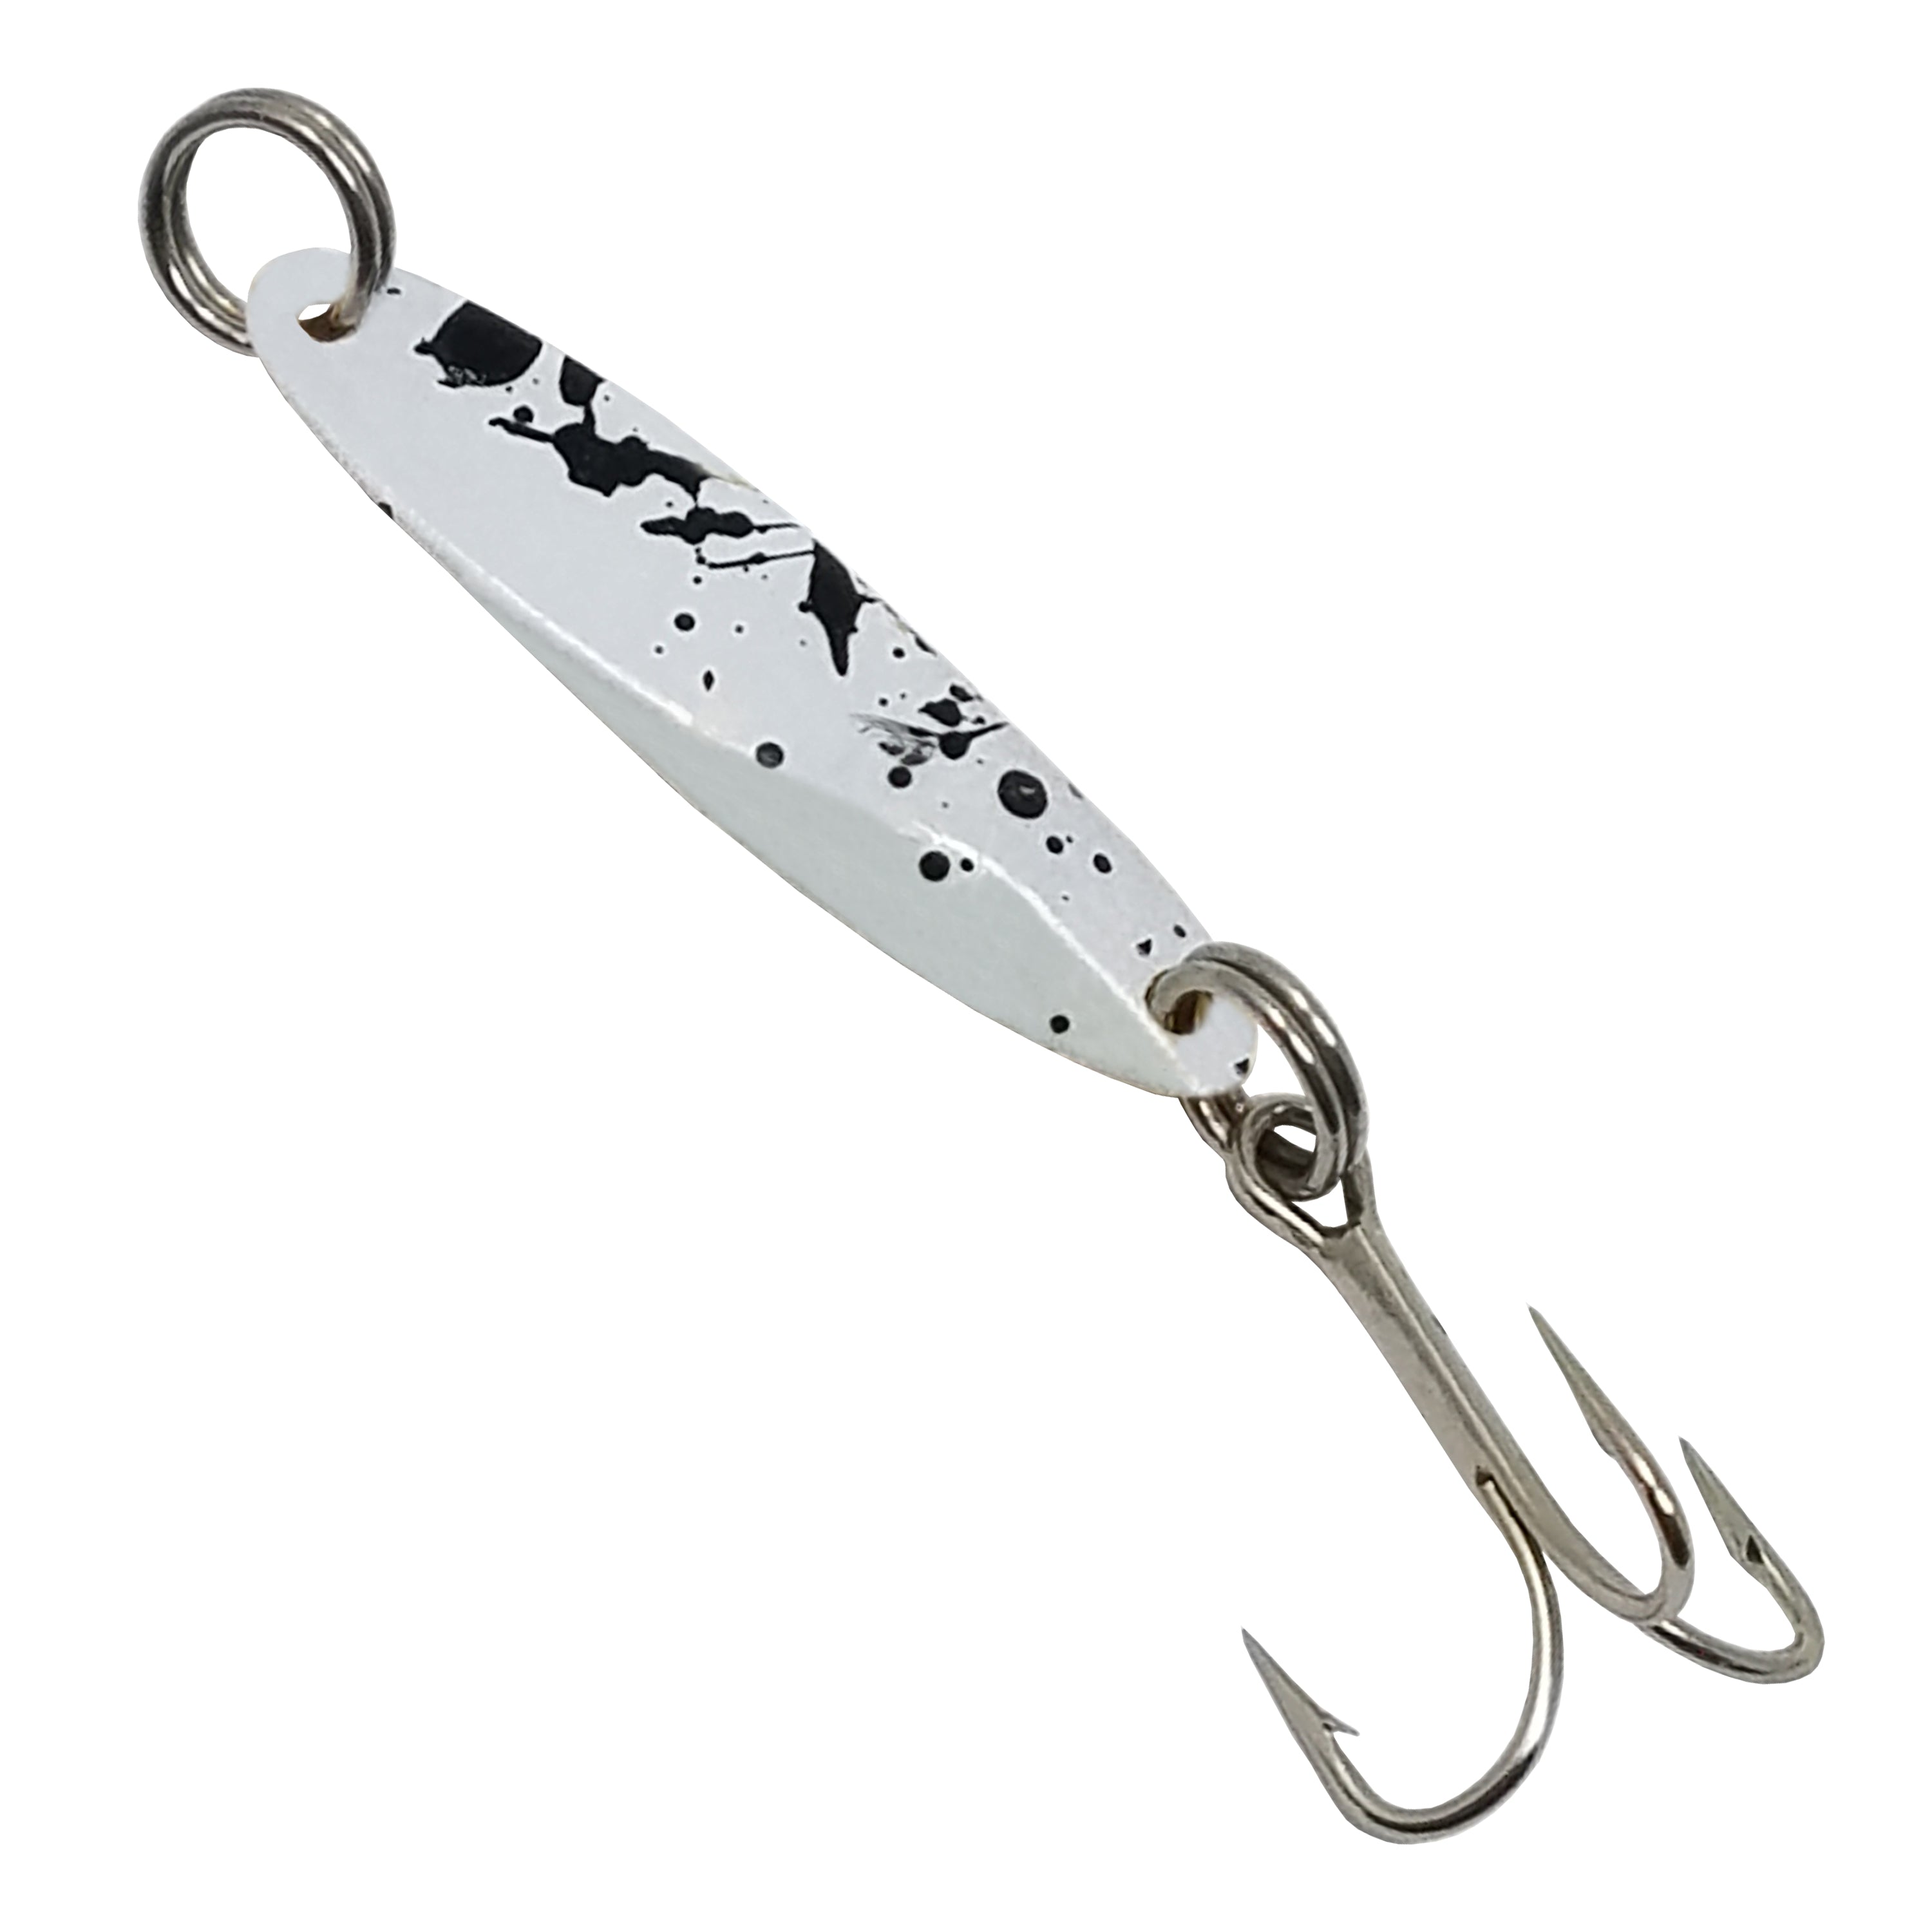 Acme Tackle - Acme Kastmaster Tungsten Ms Micro Series - Acme Tackle Company